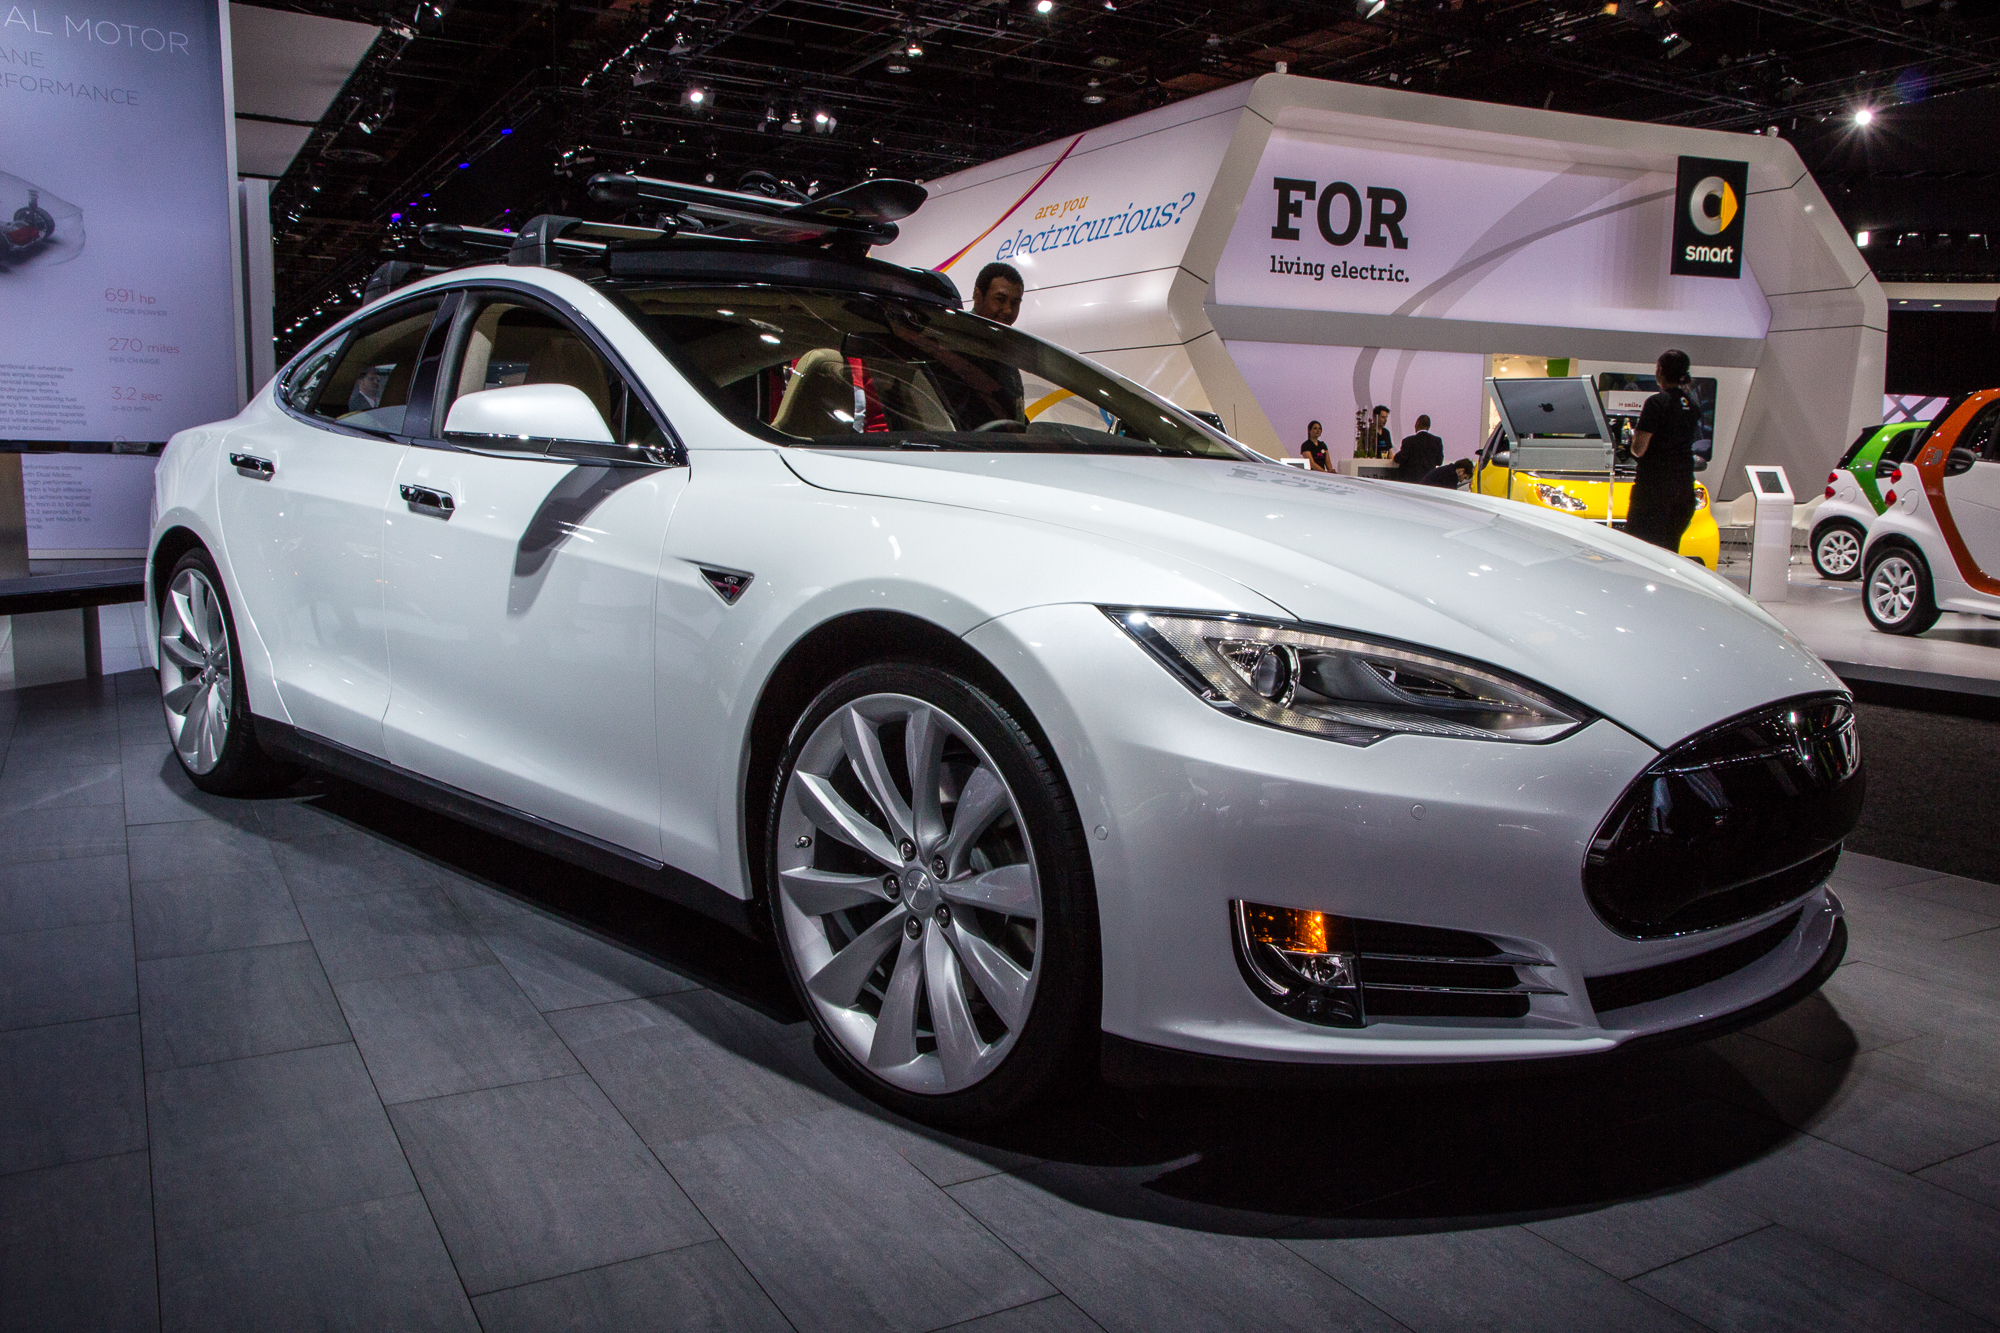 How Many Tesla Model S Electric Been Built So Far?